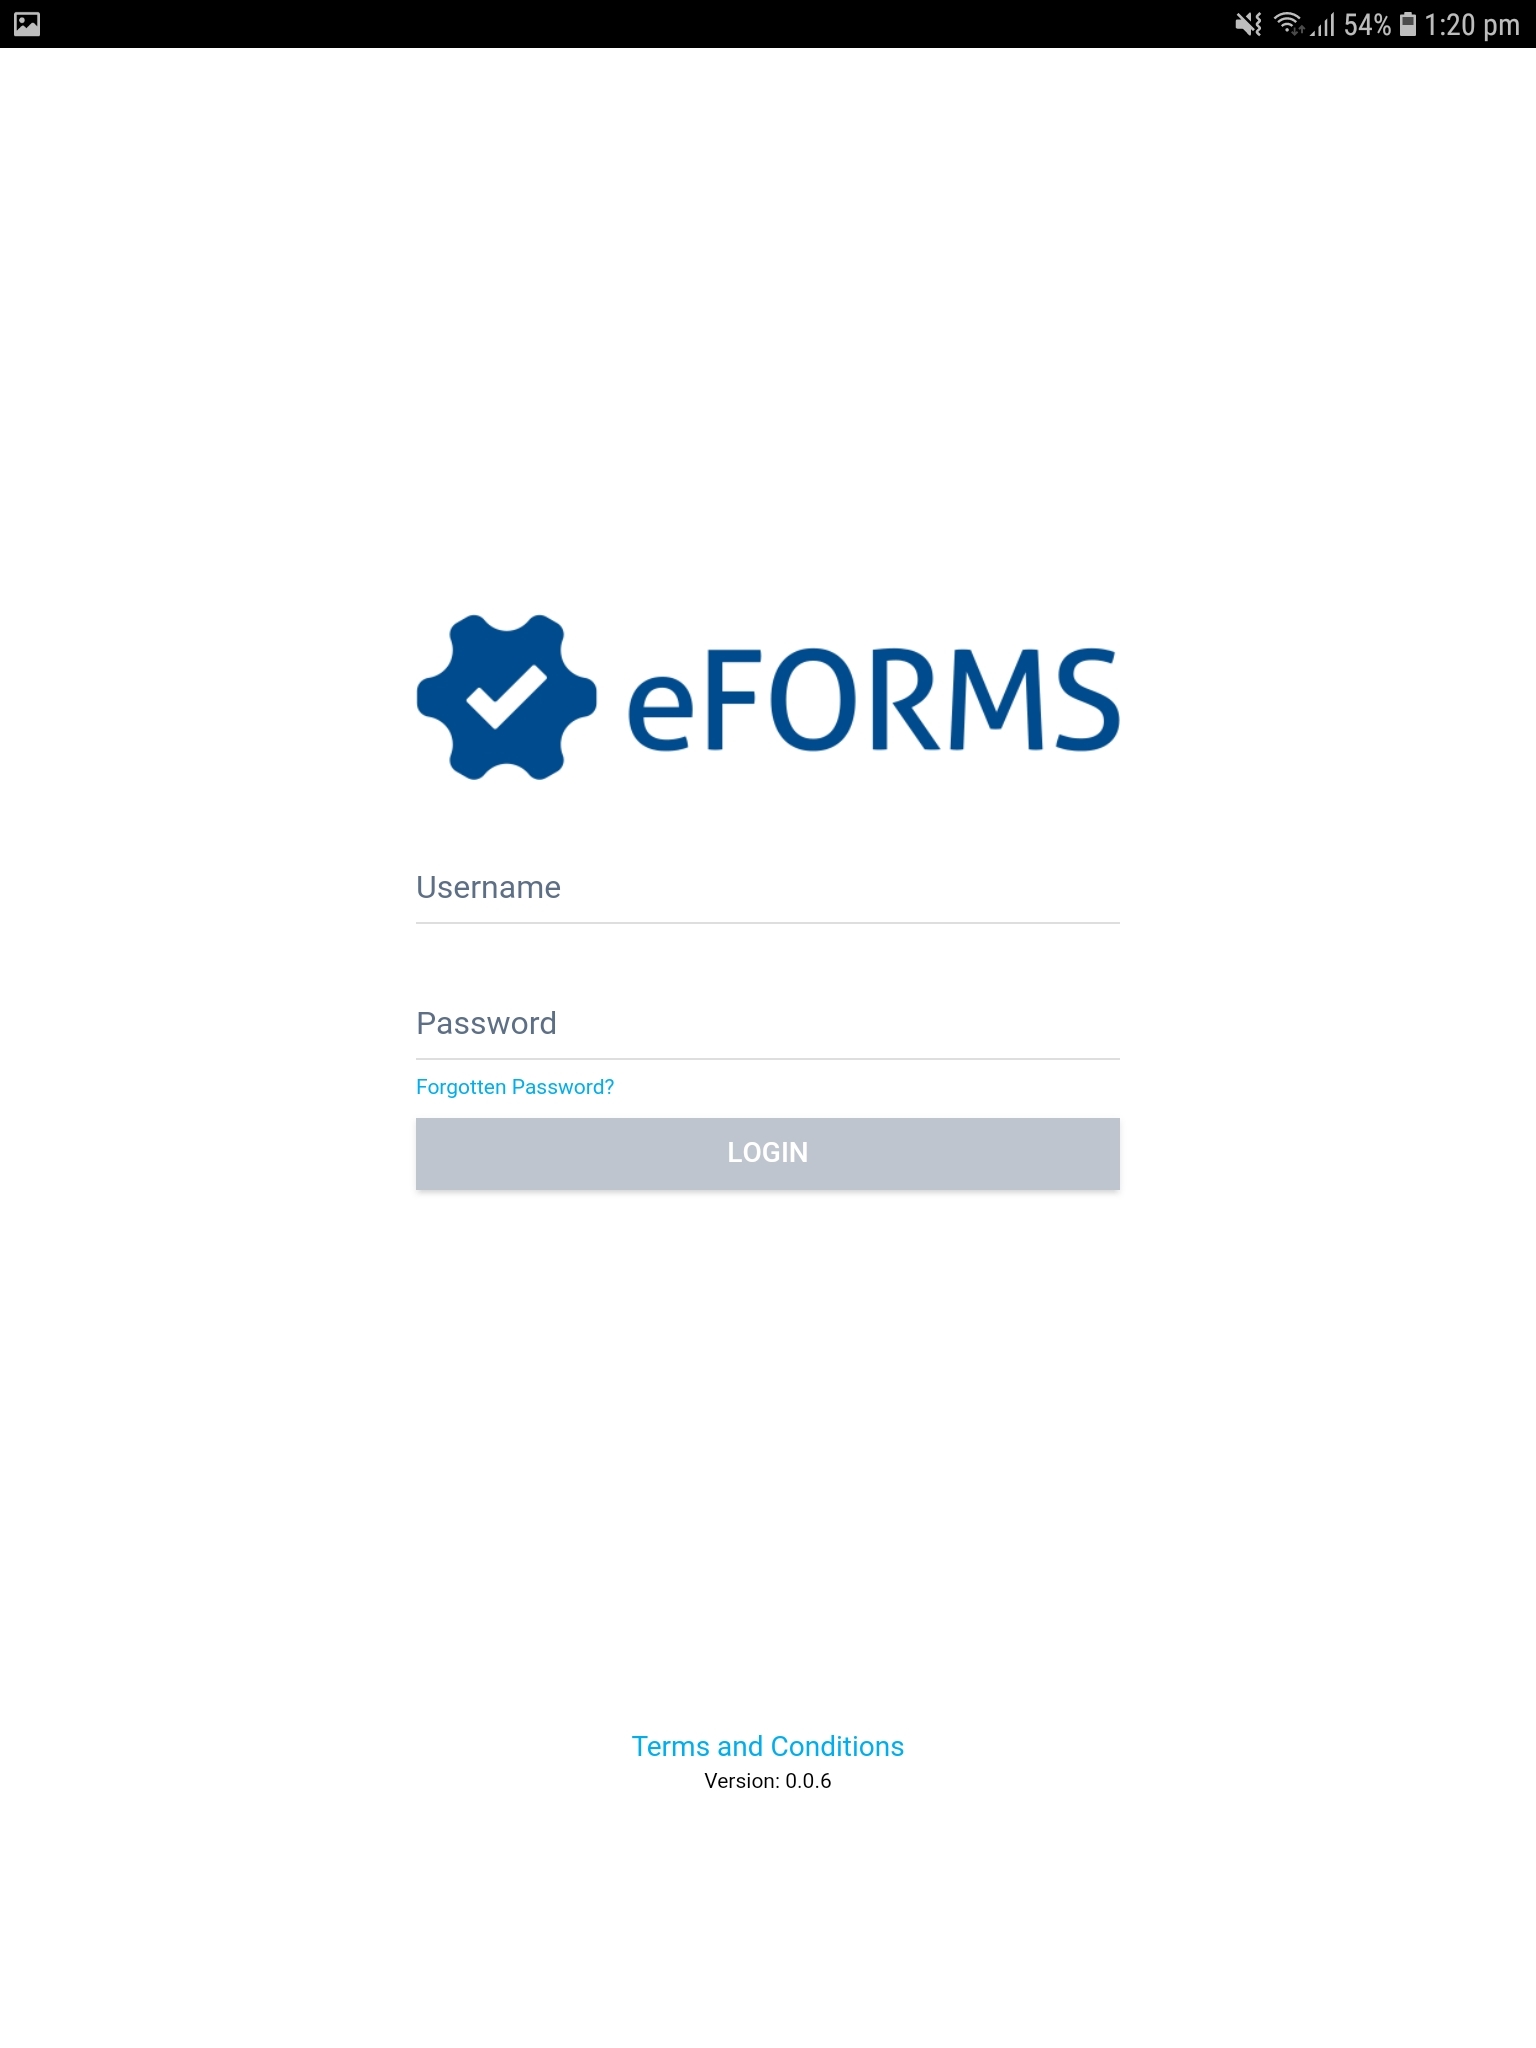 A screenshot of the eForms login page.